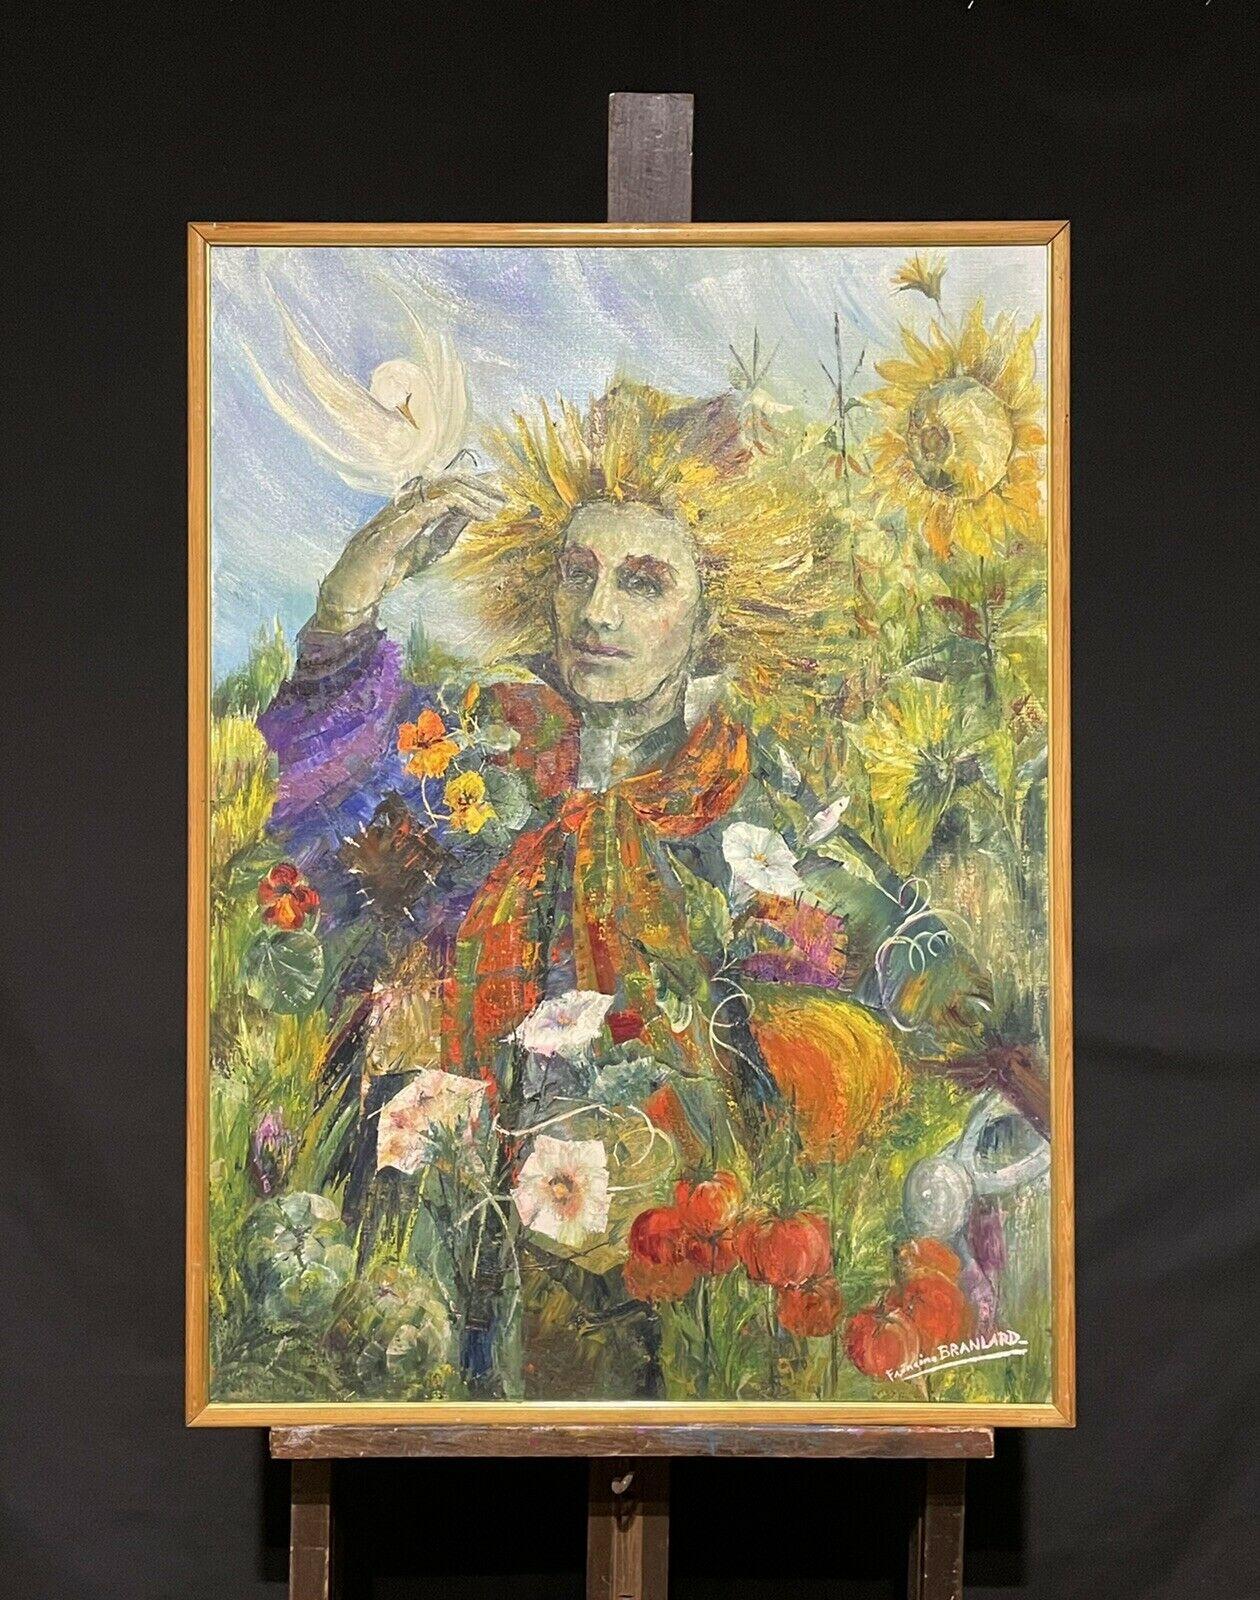 Artist/ School: Francine Braniard (French contemporary), signed

Title: titled verso

Artist/ School: Francine Braniard (French contemporary), signed

Title: titled verso and to exhibition label (Salon des Independants 1992)

Medium:  oil painting